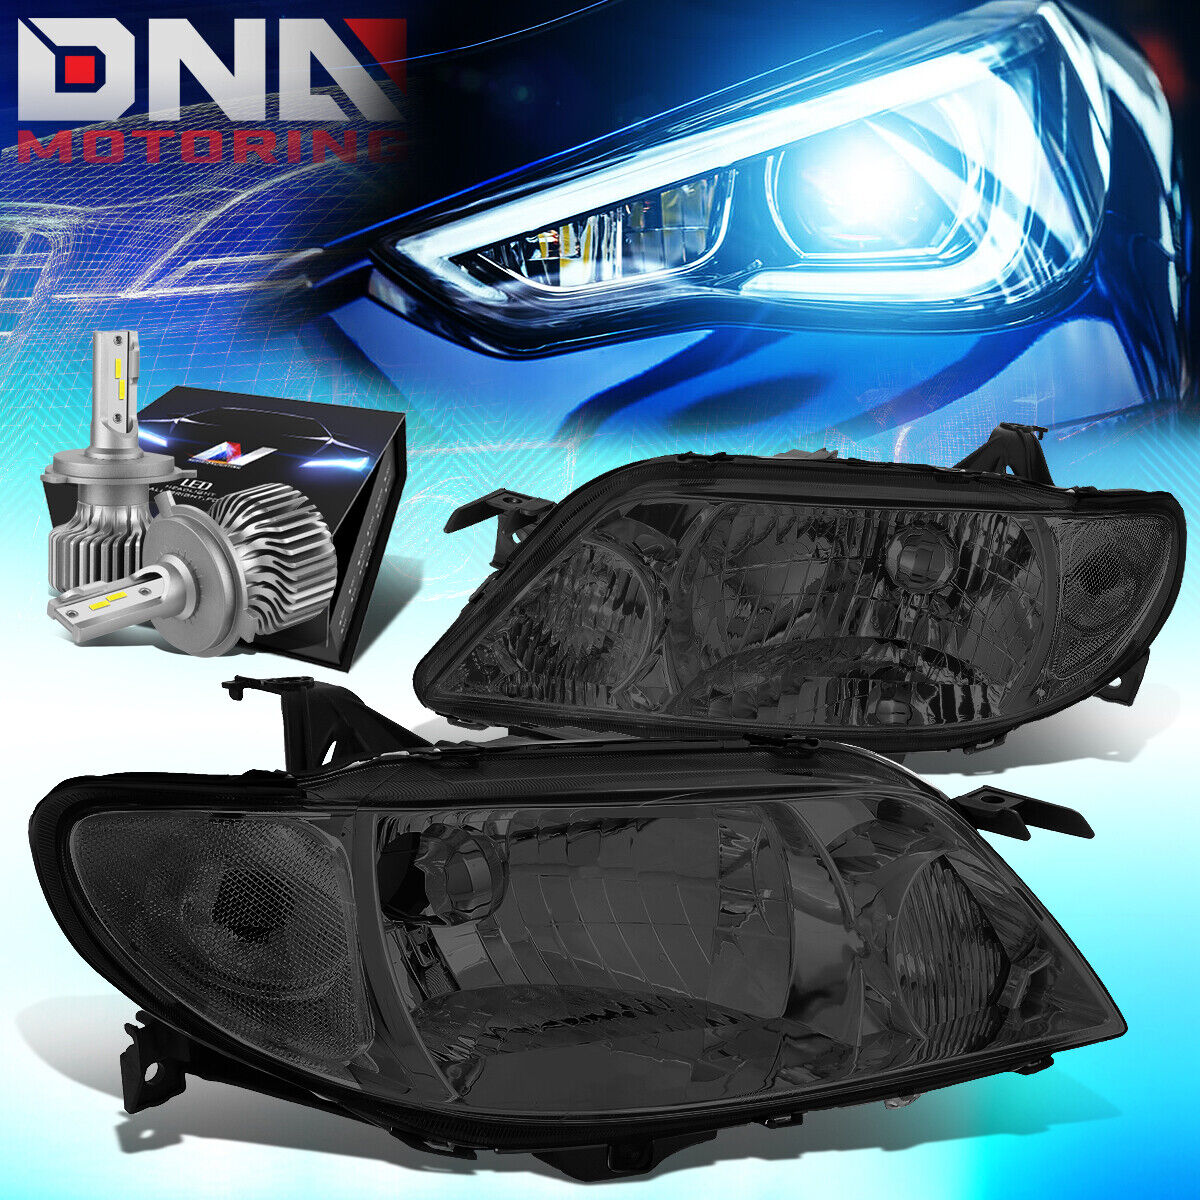 FOR 2001-2003 MAZDA PROTEGE OE STYLE HEADLIGHT LAMPS W/LED KIT SLIM STYLE SMOKED